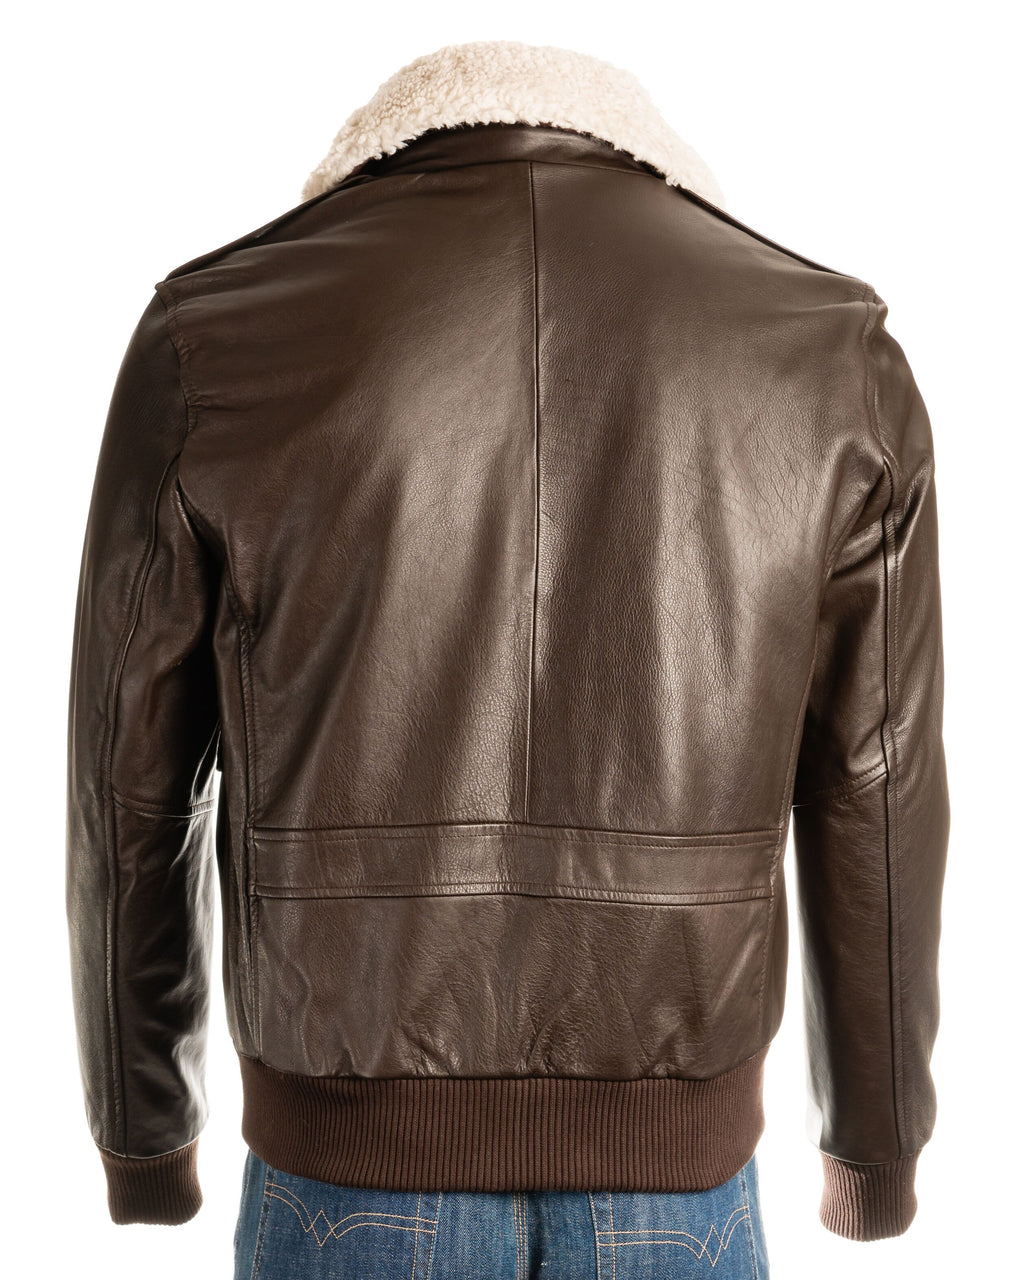 Men's Brown Aviator Pilot Flight A2 Style Leather Jacket with Detachable Real Sheepskin Collar: Maurizio